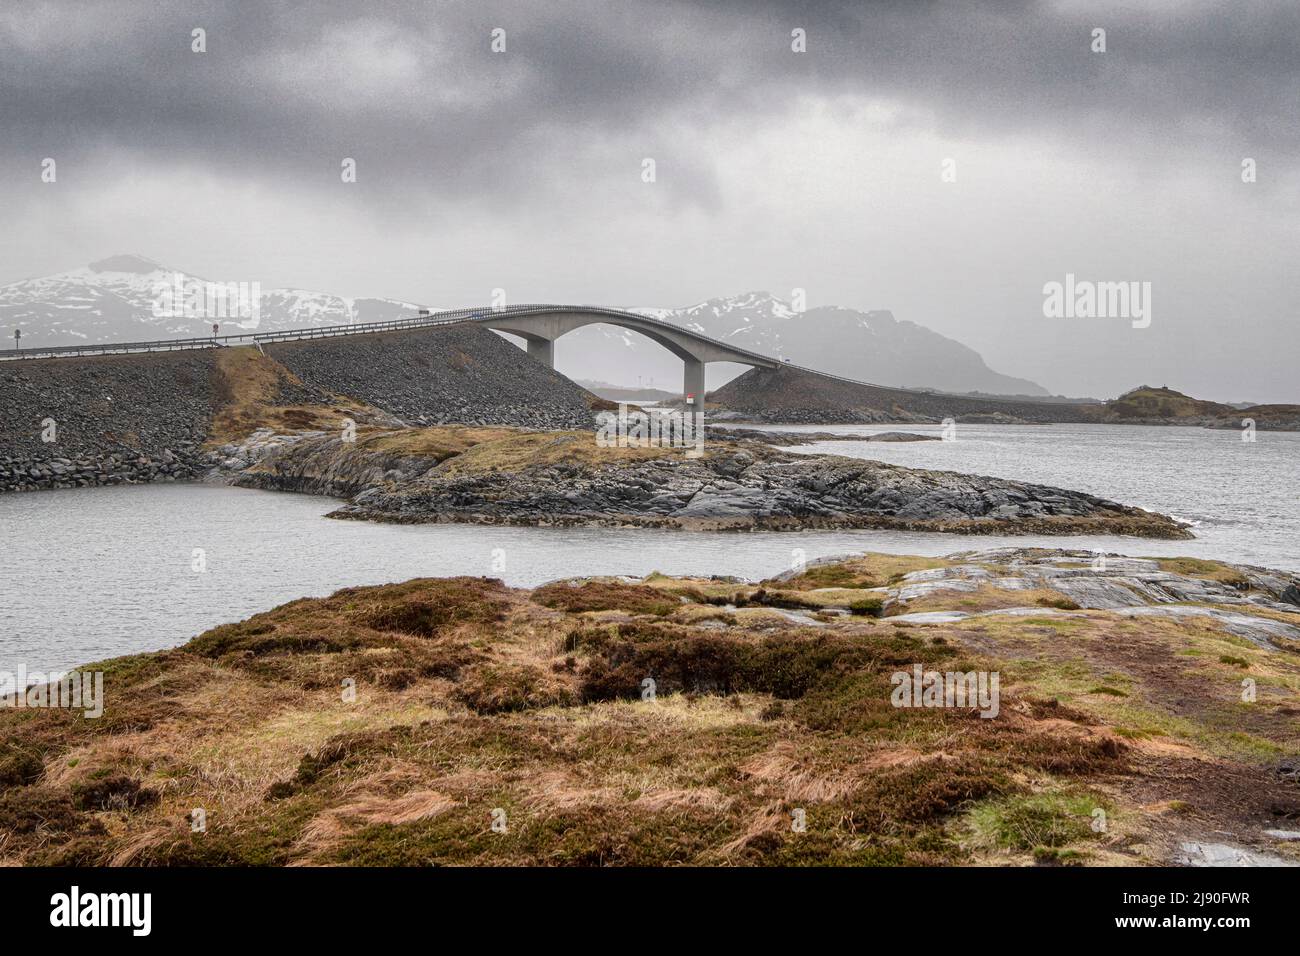 The Storseisundet Bridge,Located in the midwest part of the Norwegian coastline, cantilever bridge part of the Norway Atlantic higway Stock Photo